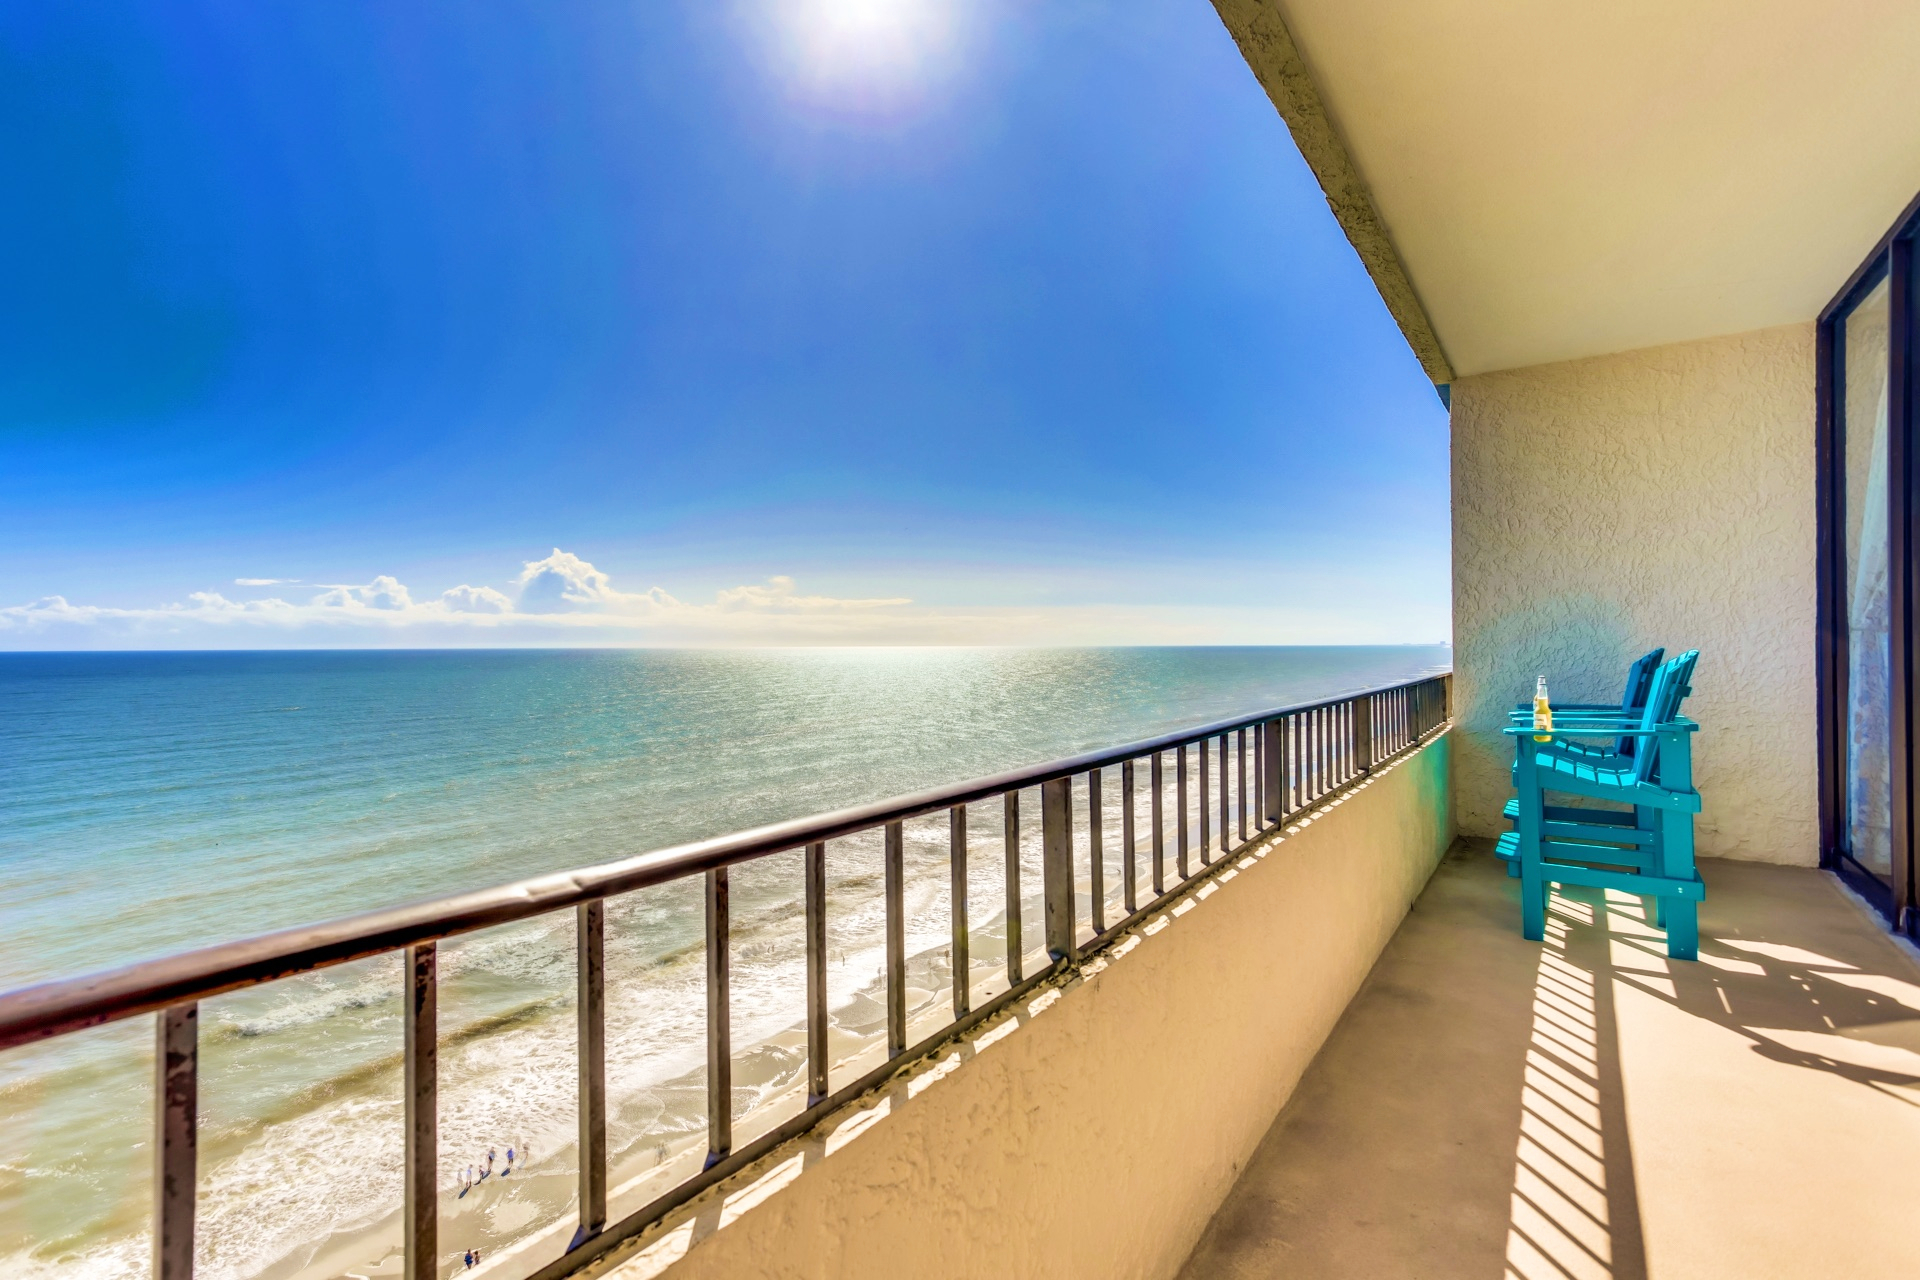 A view of the ocean from the Ocean Reef 1703 balcony